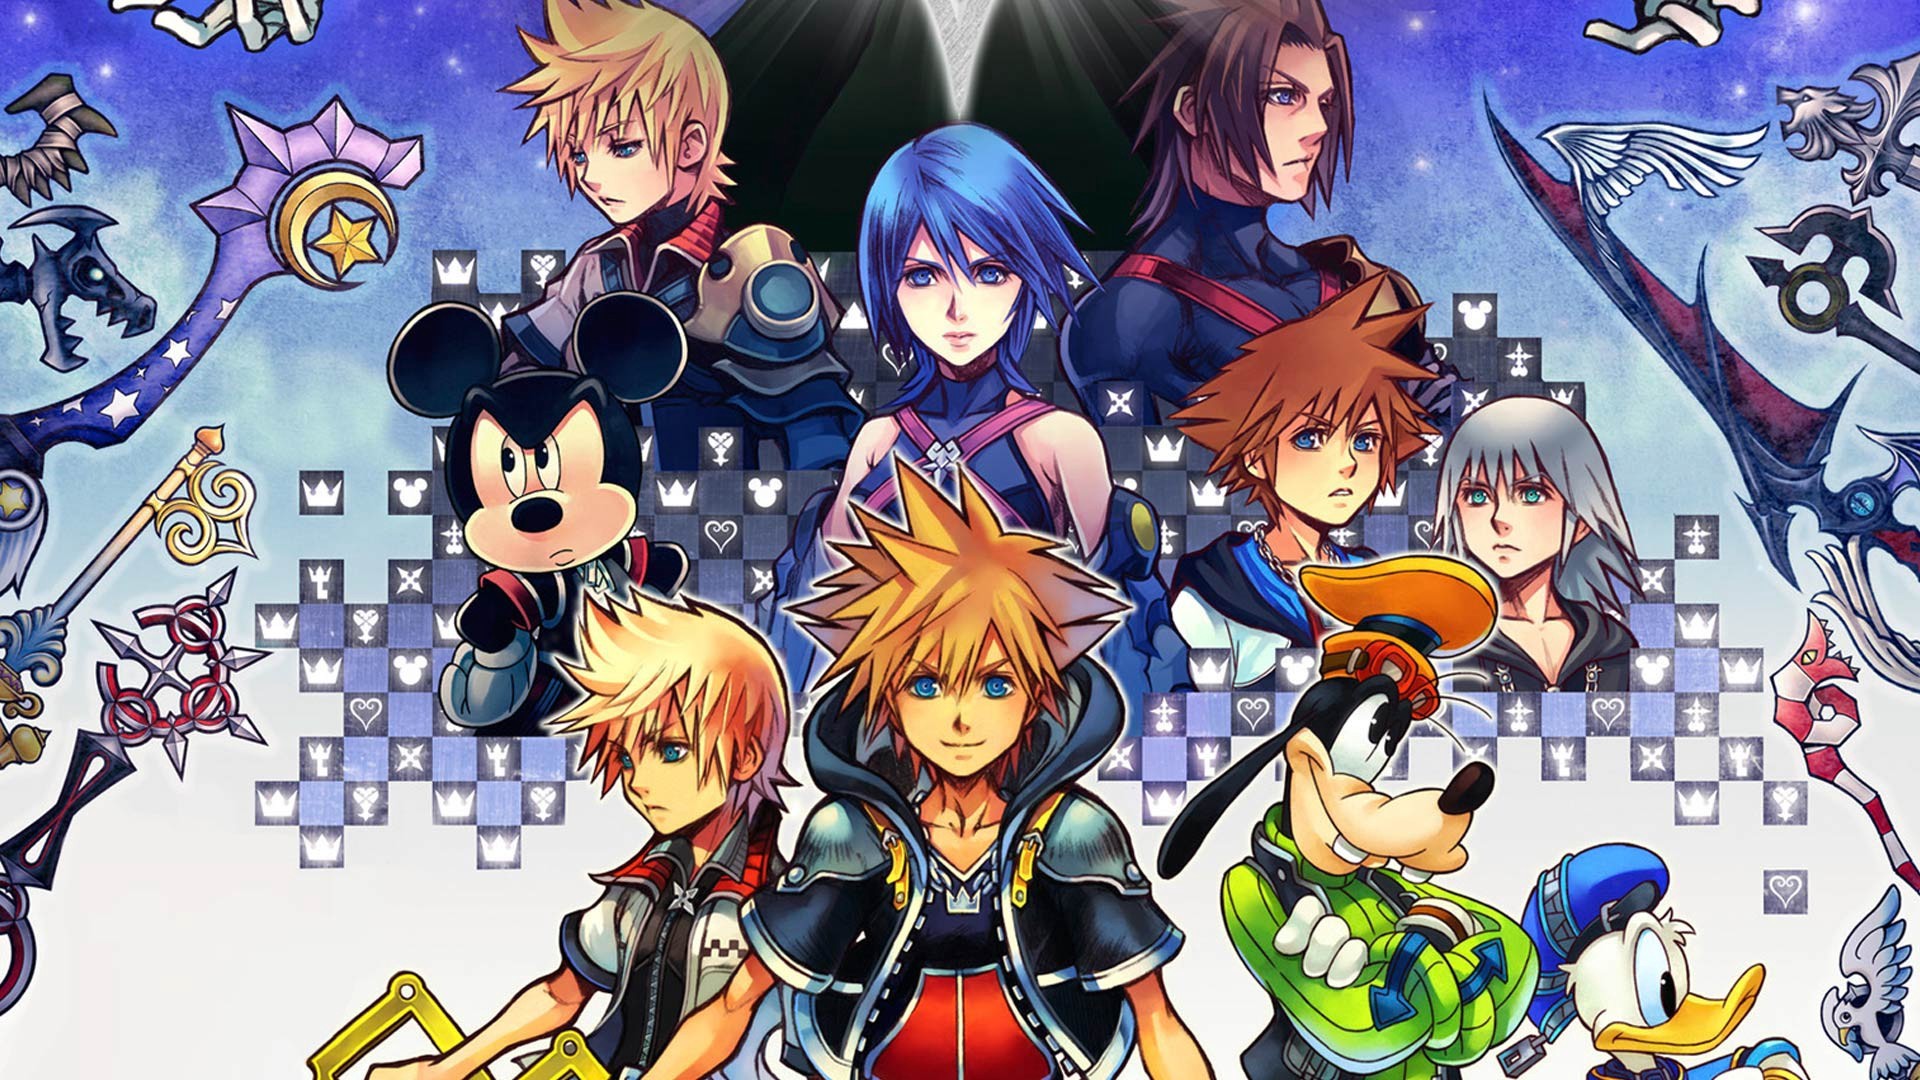 1920x1080 Kingdom Hearts I.5 + II.5 compiles remastered versions of six previously  released Kingdom Hearts games: Kingdom Hearts I, Kingdom Hearts II, 358/2  Days and ...